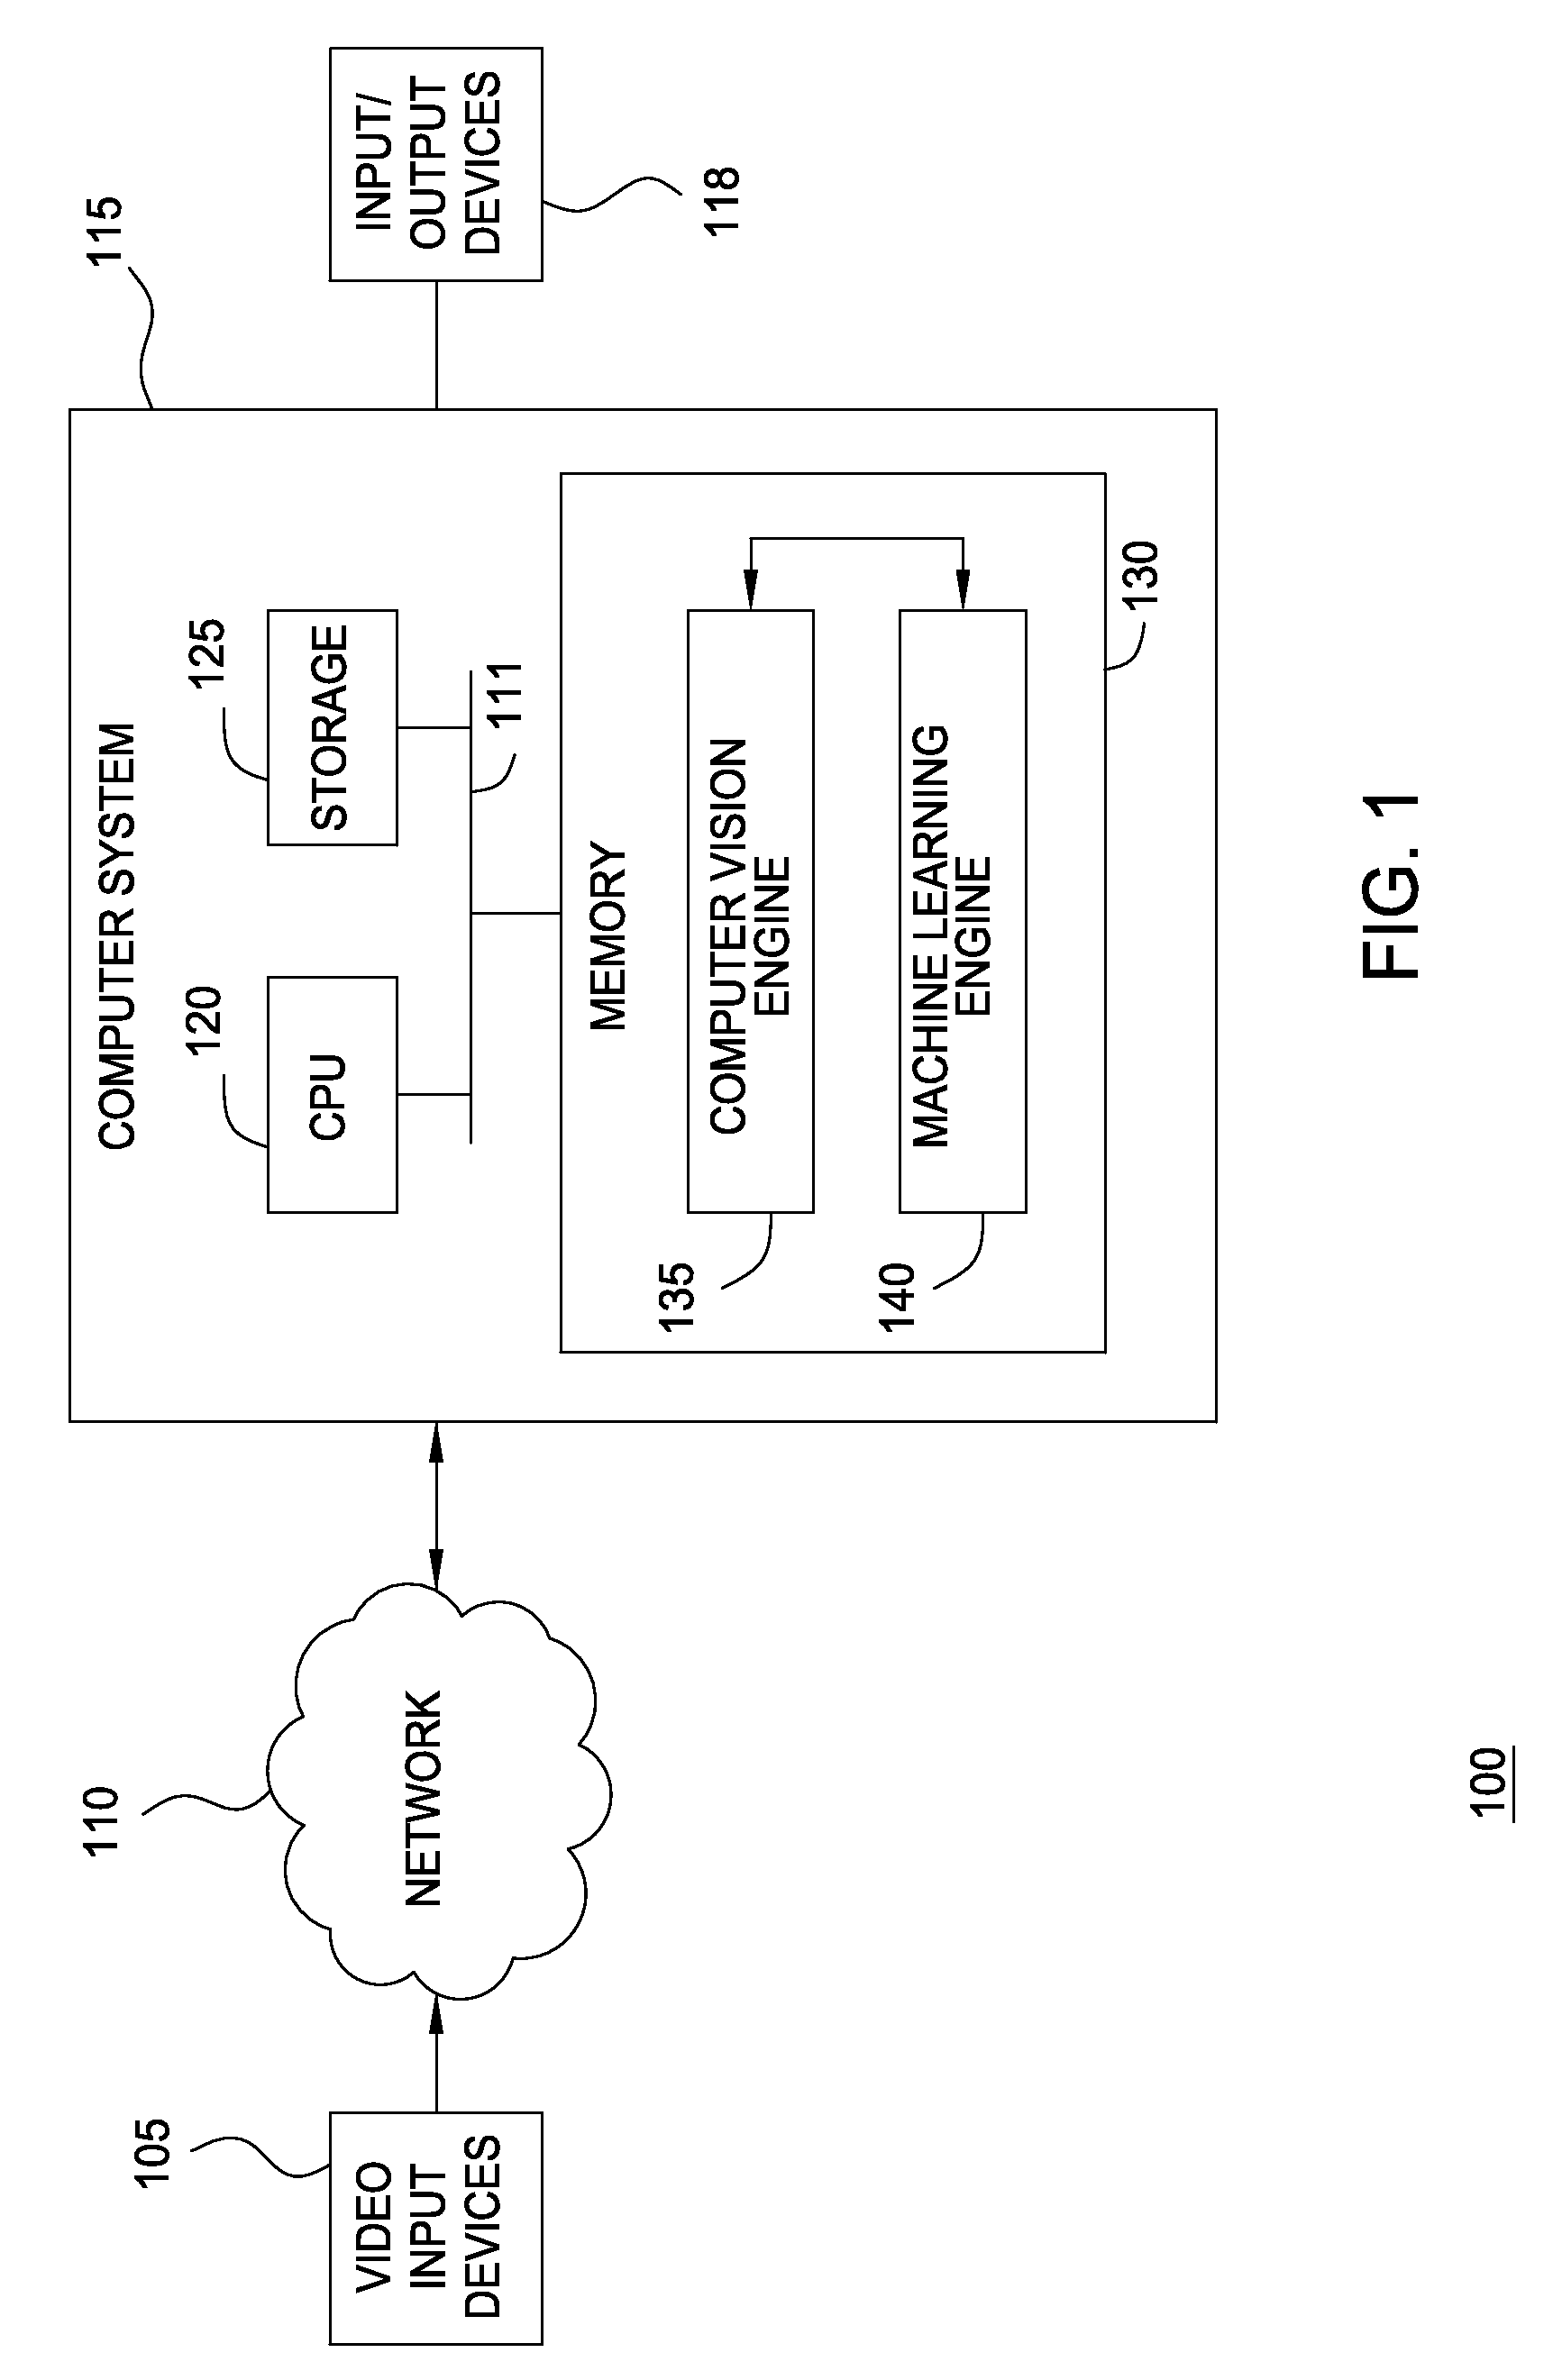 Loitering detection in a video surveillance system